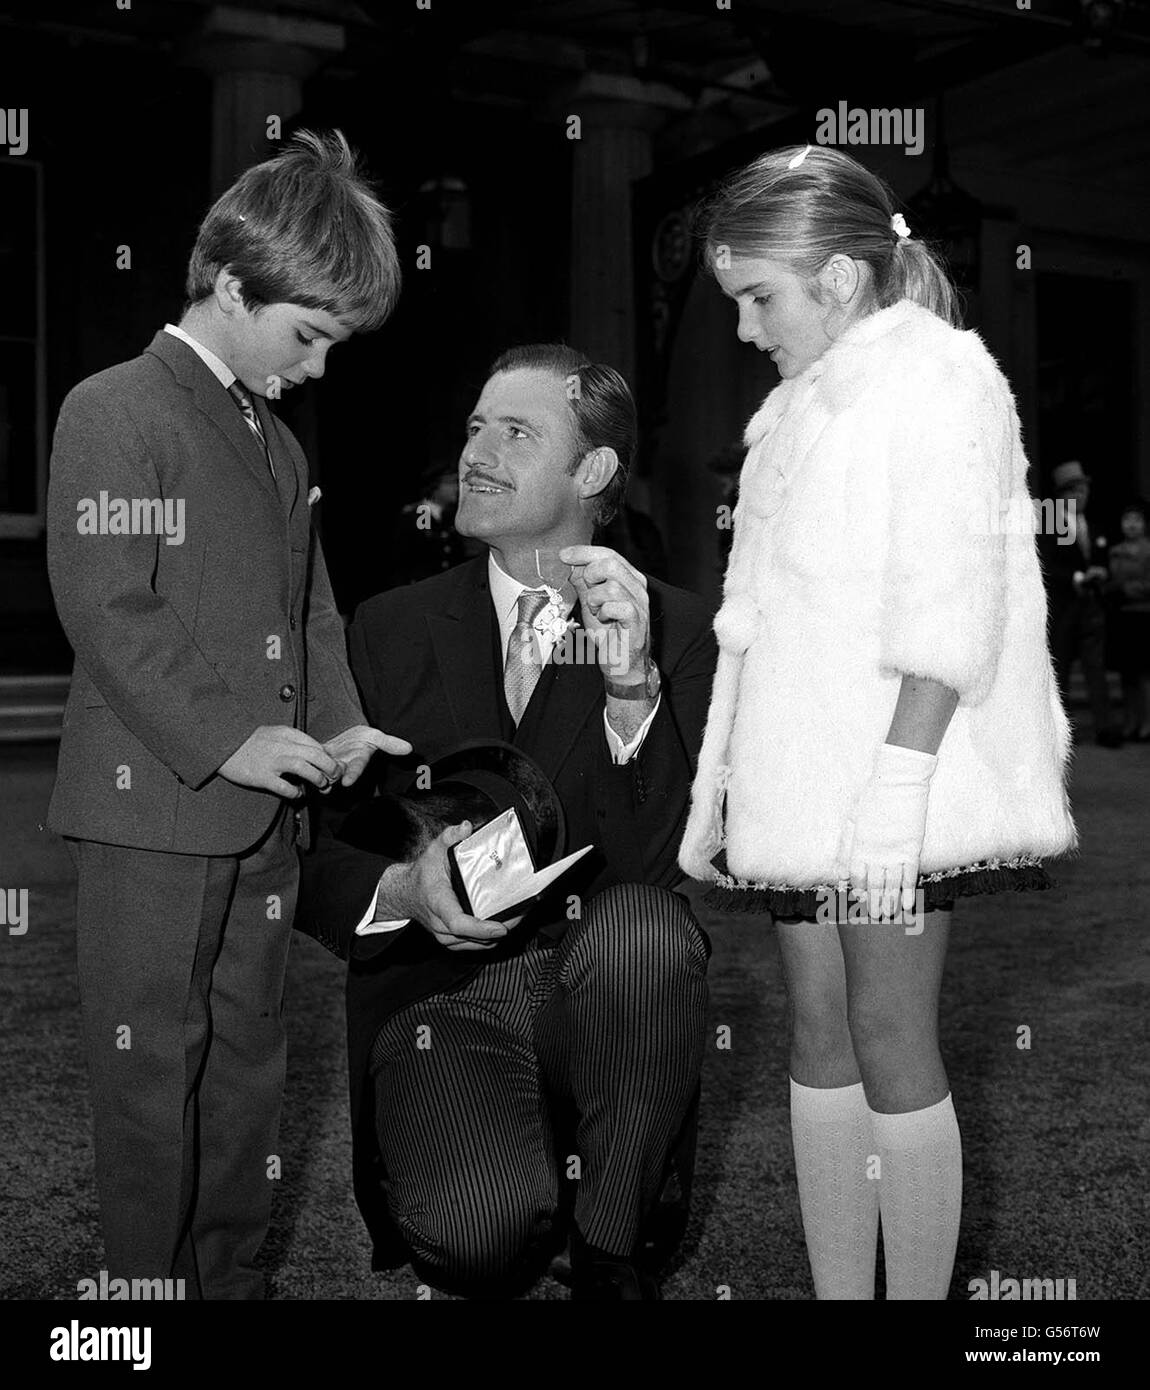 GRAHAM HILL 1968: Racing driver Graham Hill showing his children Damon (8), left, and Brigitte (9), the OBE he received from the Queen Mother at his investiture at Buckingham Palace, London. The Queen Mother congratulated him on his second world championship and asked about his victory in the Mexican Grand Prix. Stock Photo